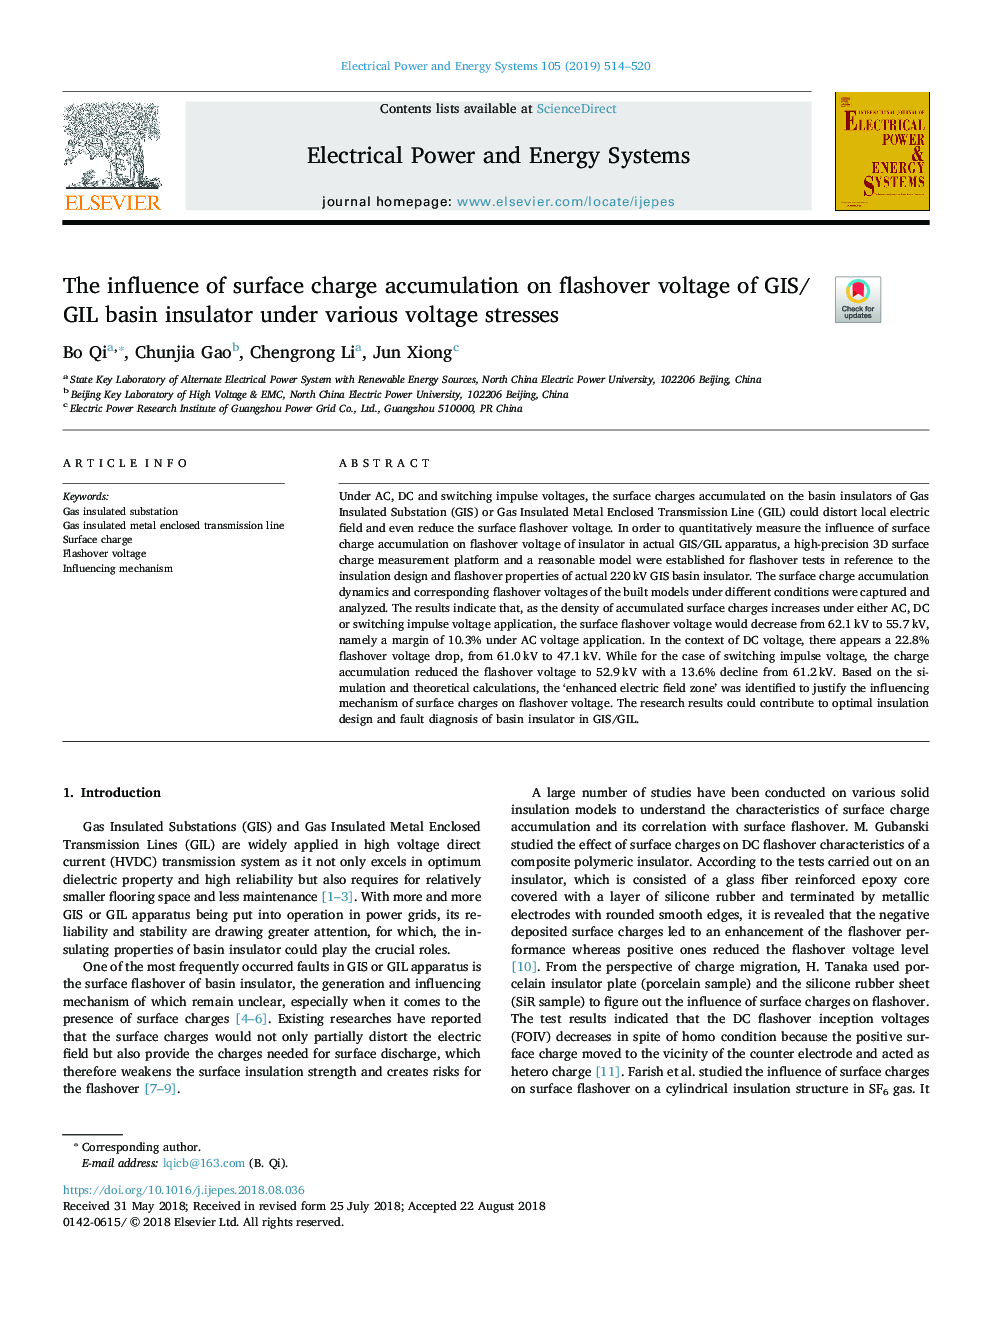 The influence of surface charge accumulation on flashover voltage of GIS/GIL basin insulator under various voltage stresses